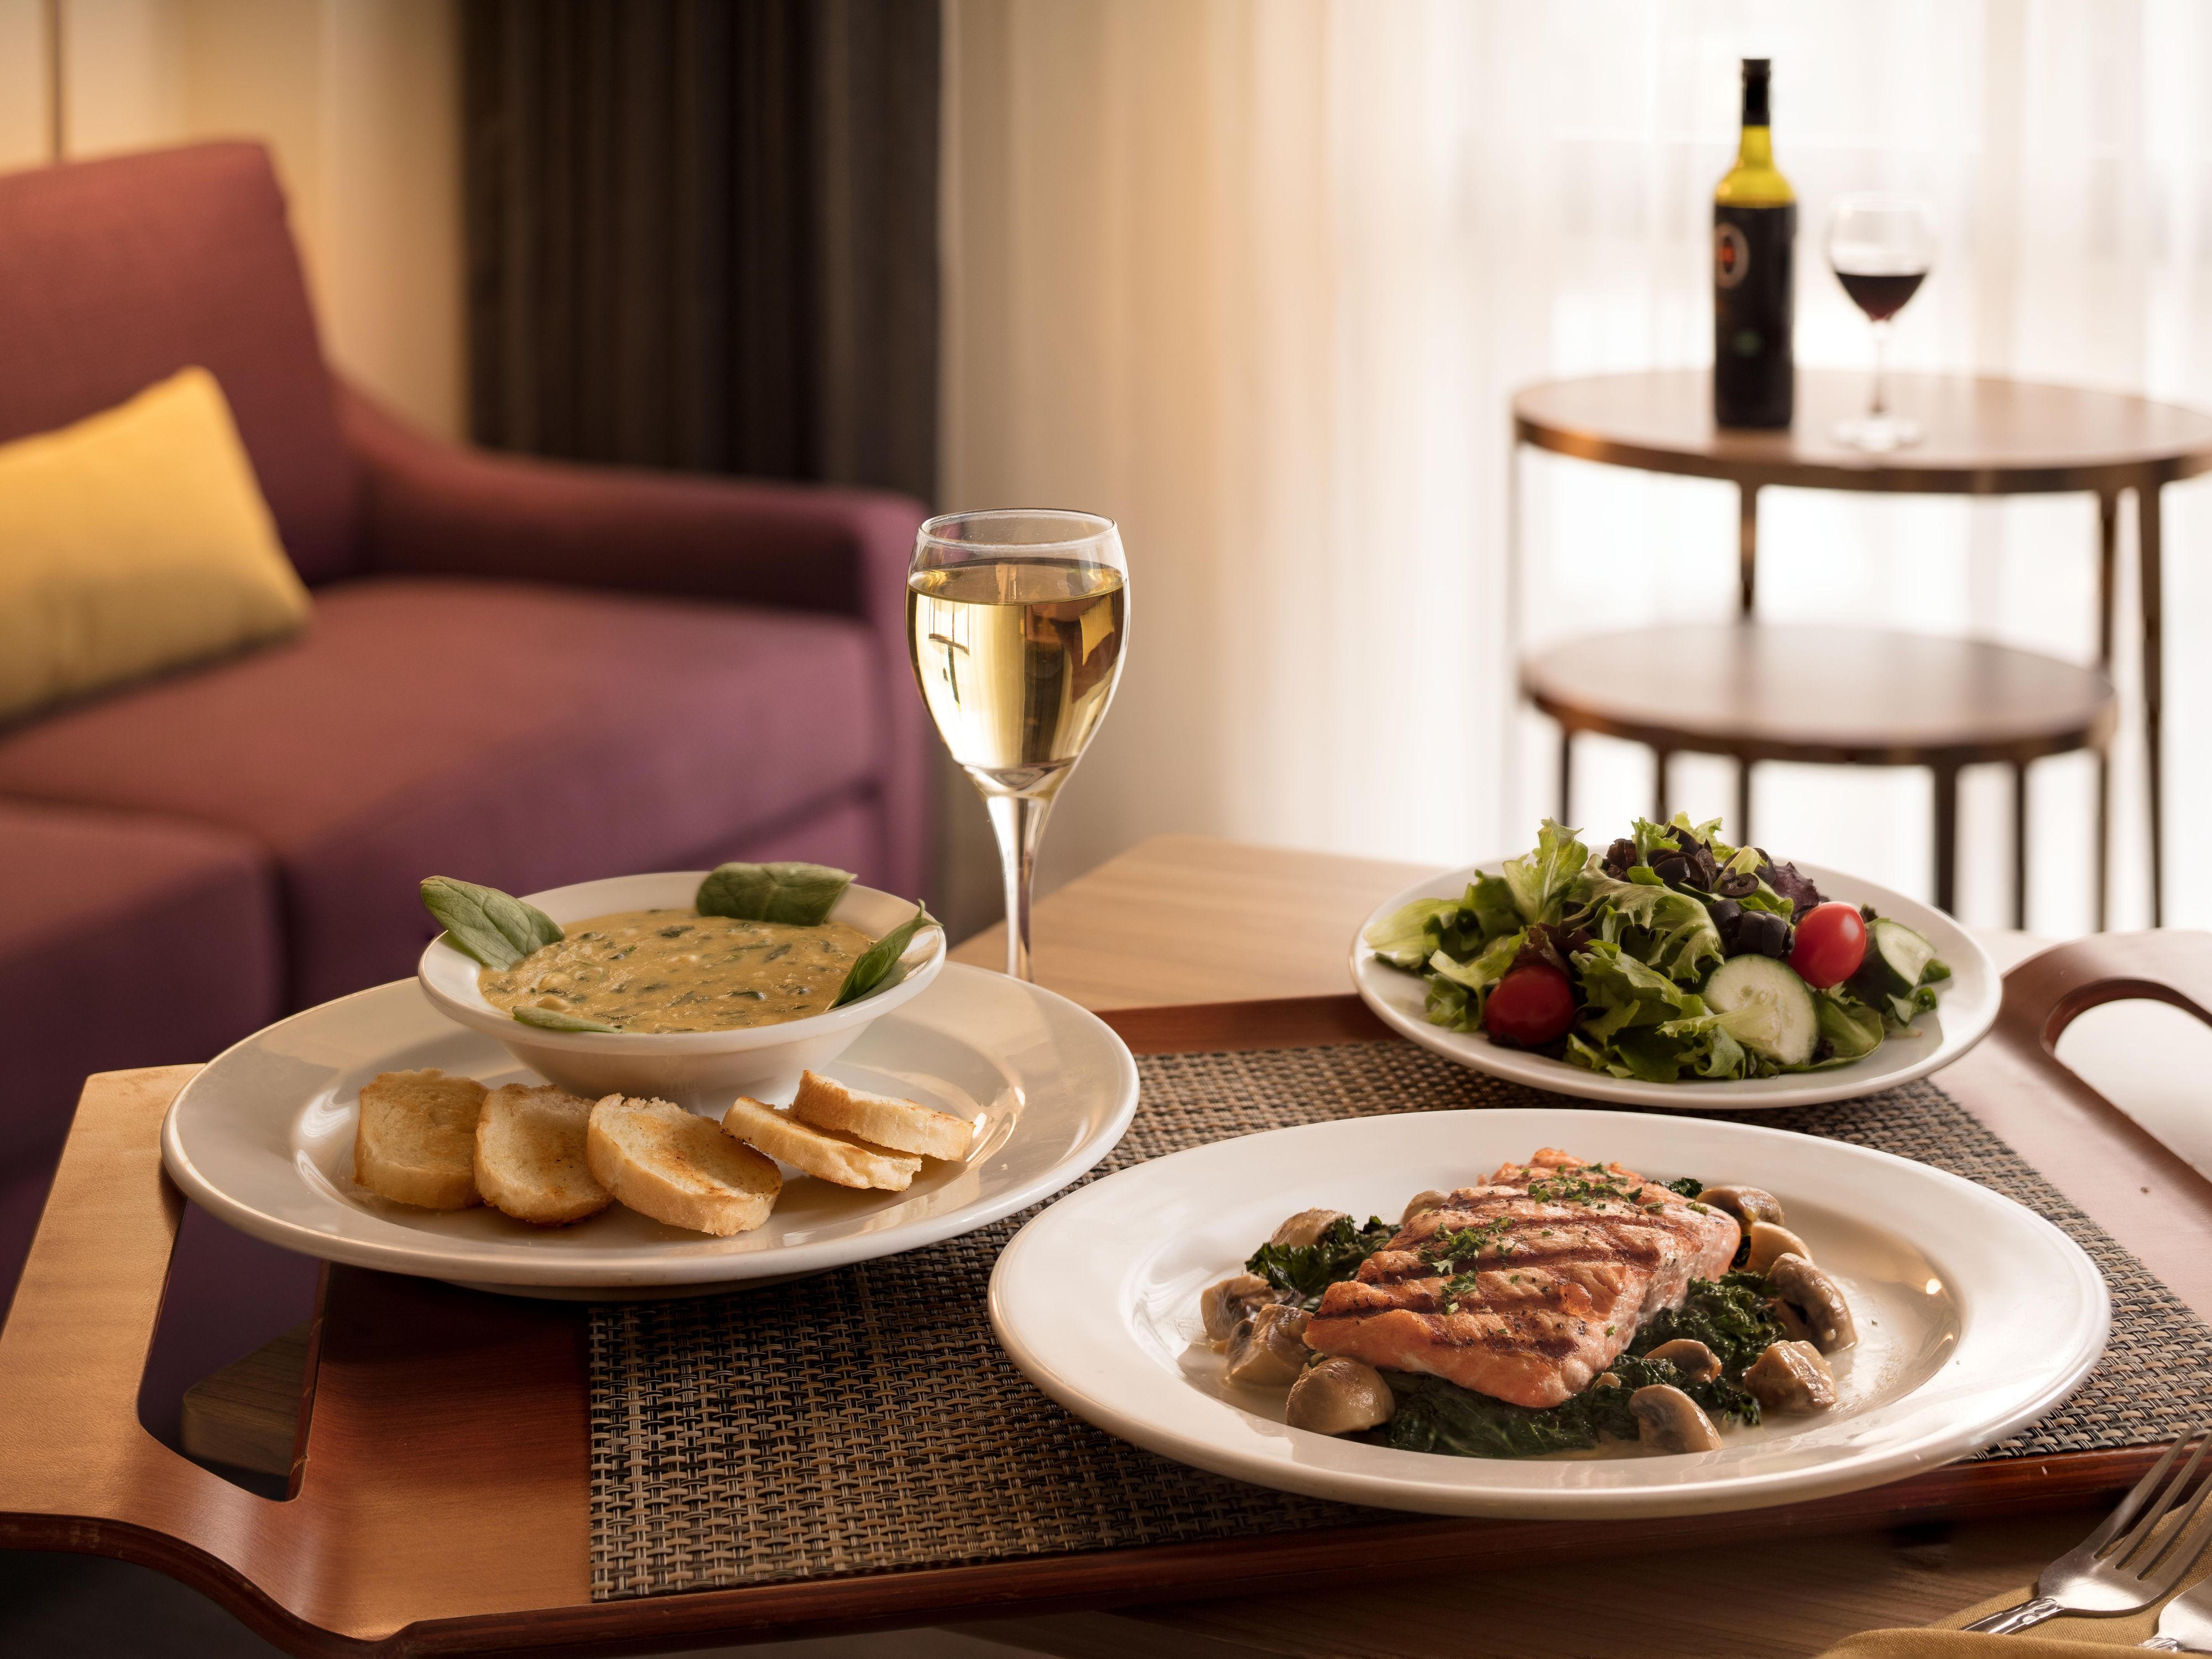 In-room dining from Bristol Bar & Grill is available for guests.